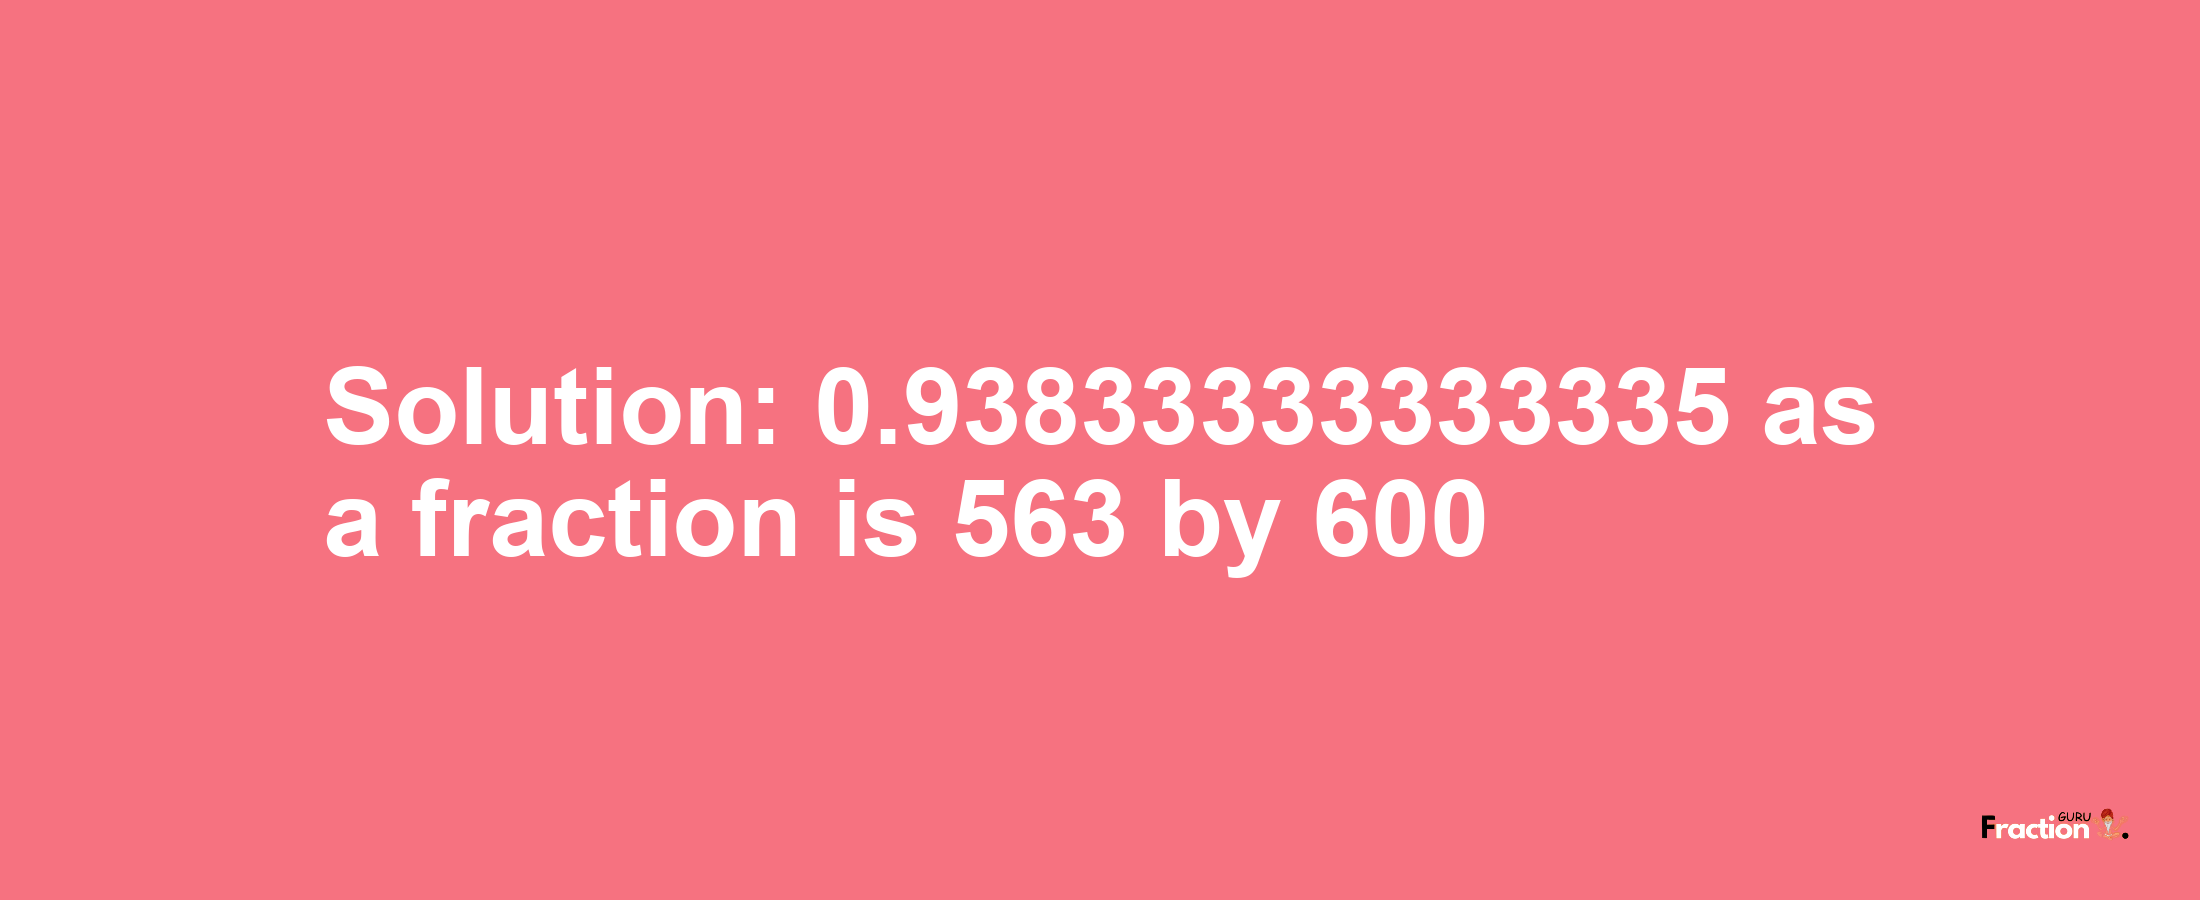 Solution:0.93833333333335 as a fraction is 563/600